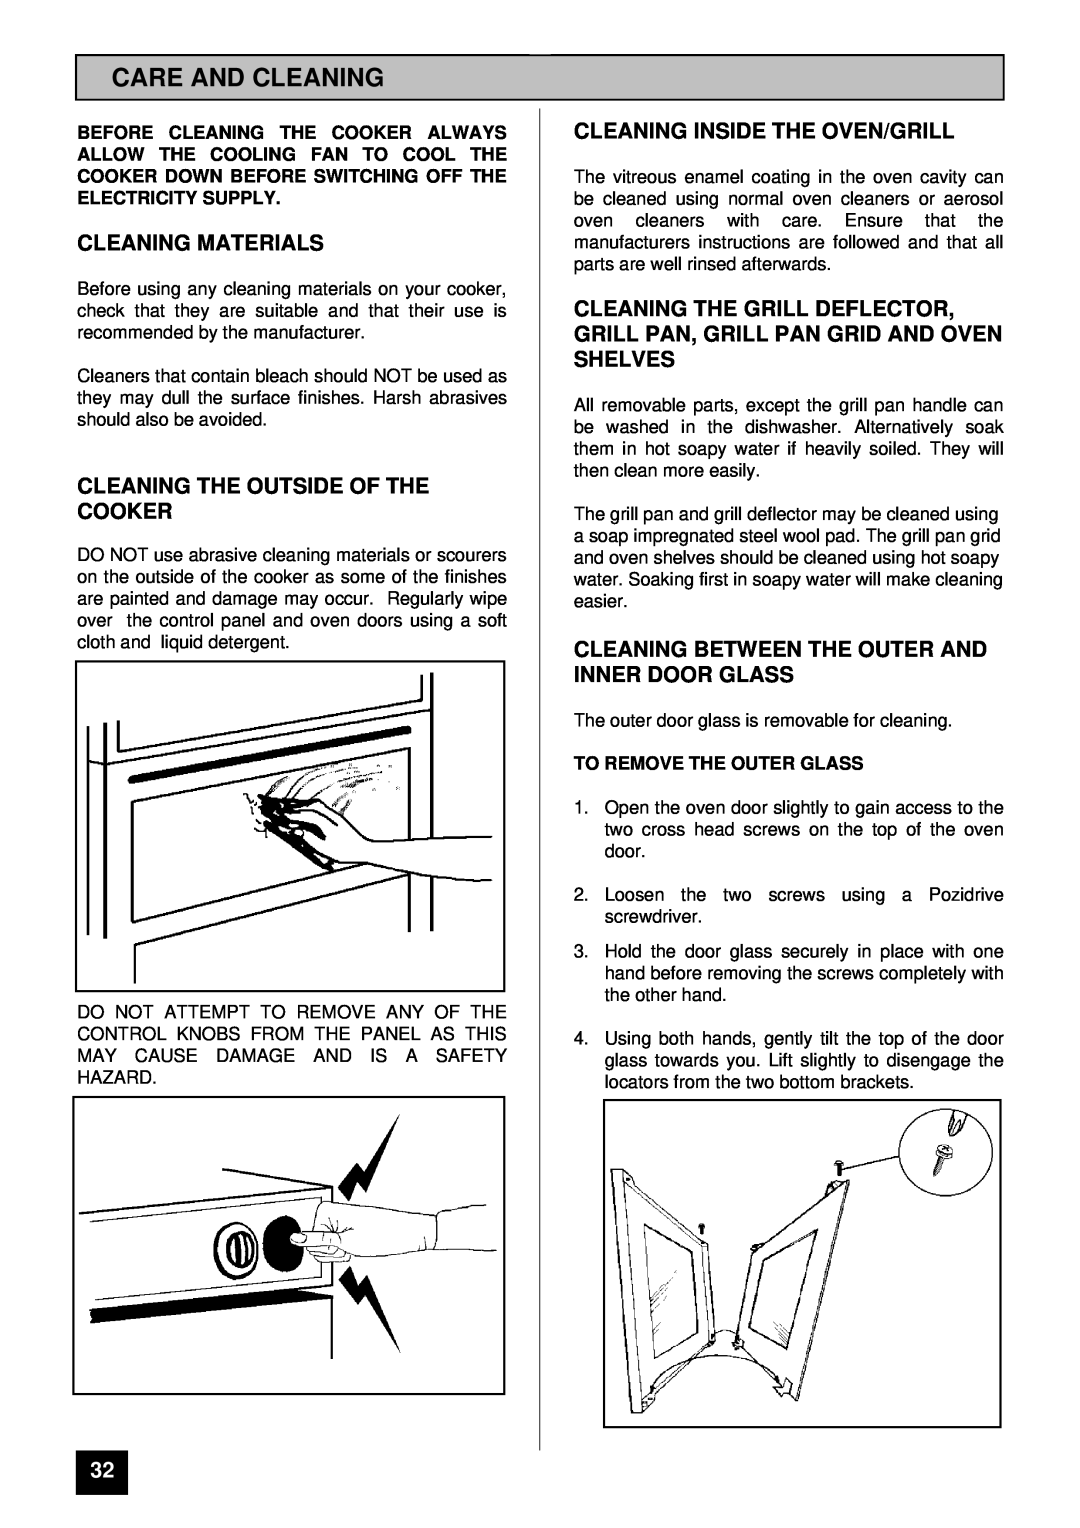 Tricity Bendix BS 613/2 installation instructions Care And Cleaning, Cleaning Materials, Cleaning The Outside Of The Cooker 